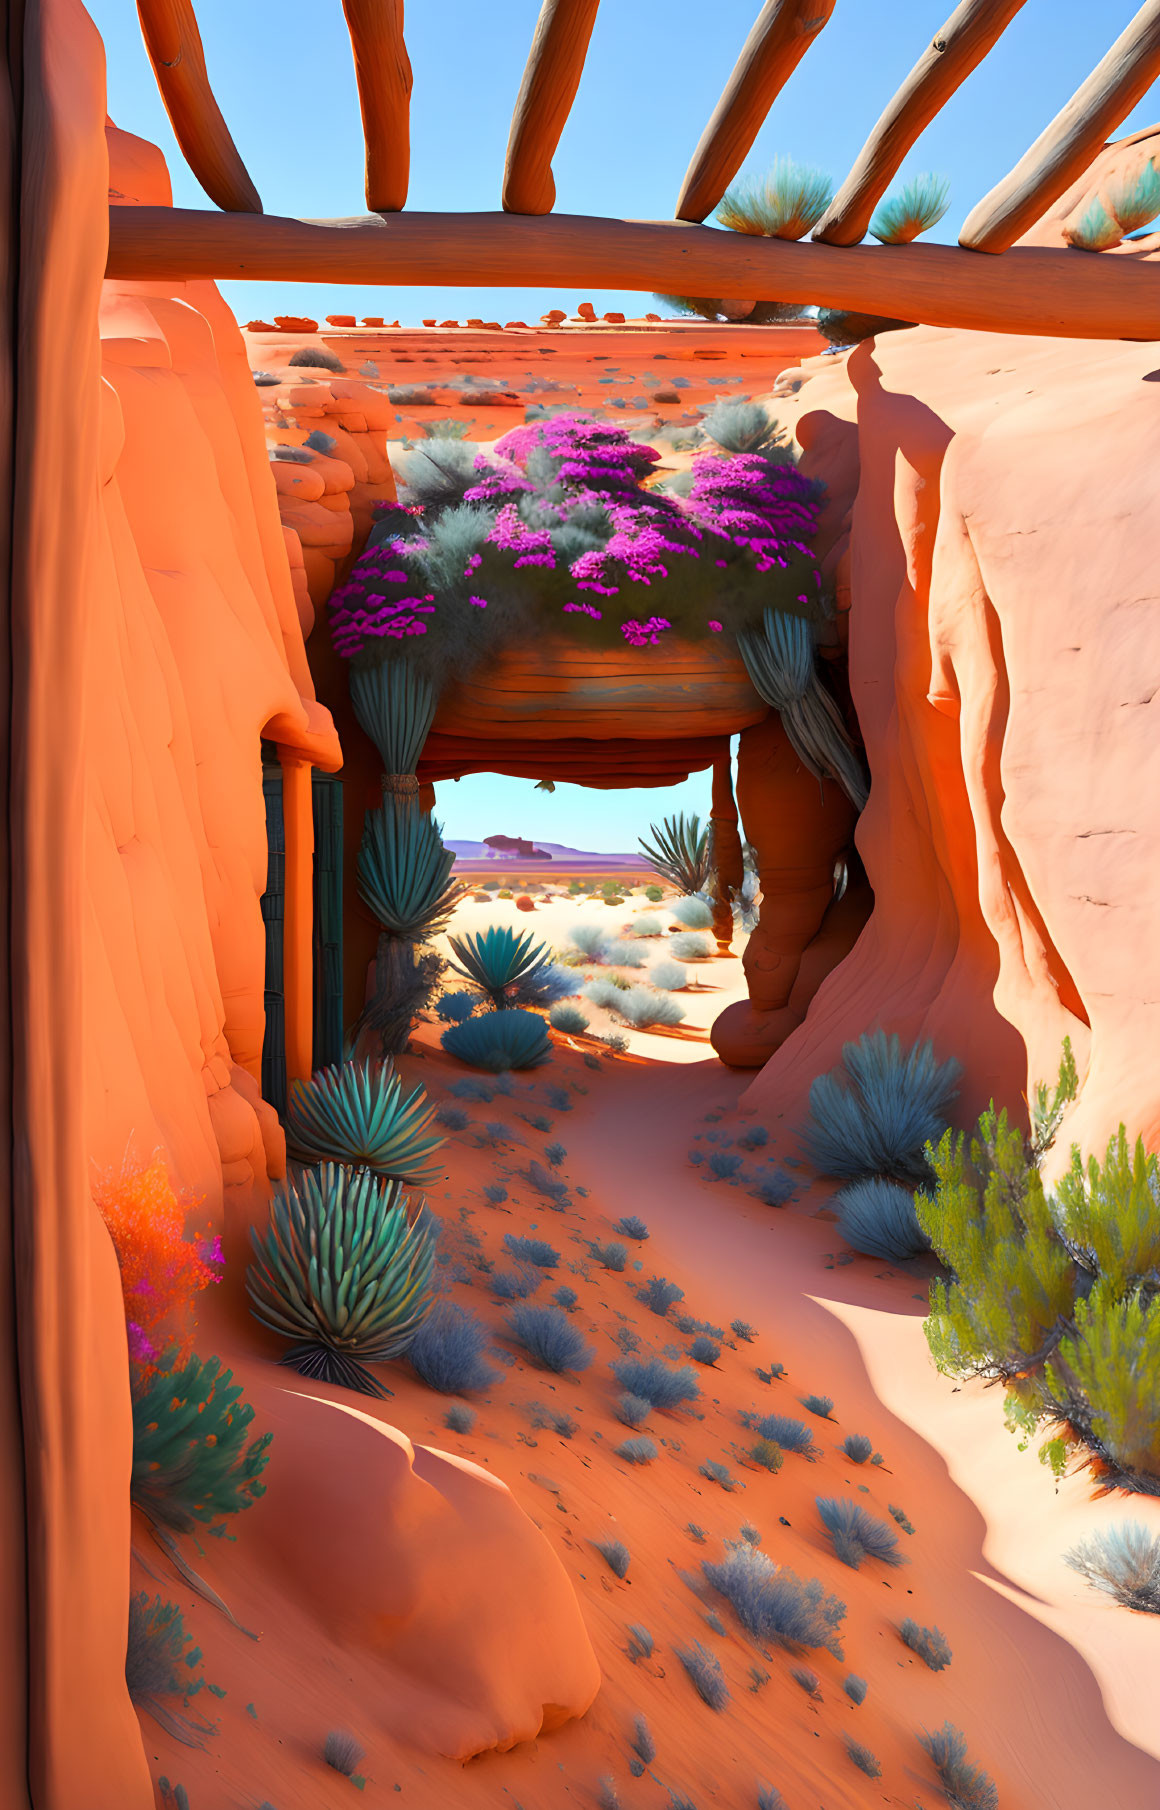 Colorful desert scene with natural arch, blue sky, purple flowers, and orange sand formations